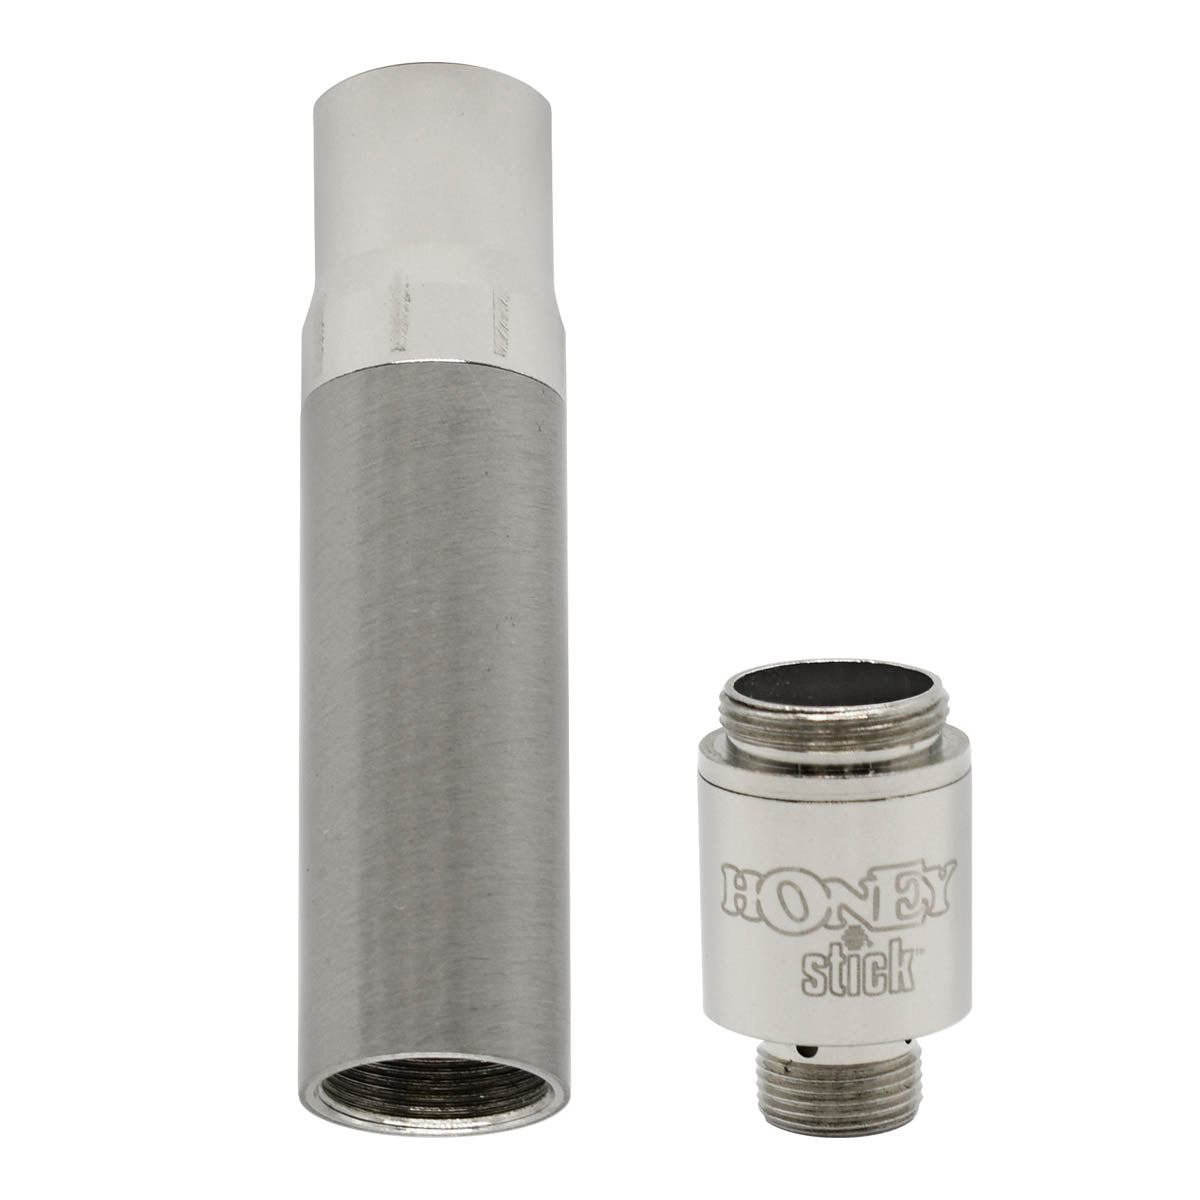 Silencer Dab Cartridge Elements: Mouthpiece Cover and Wax Atomizer